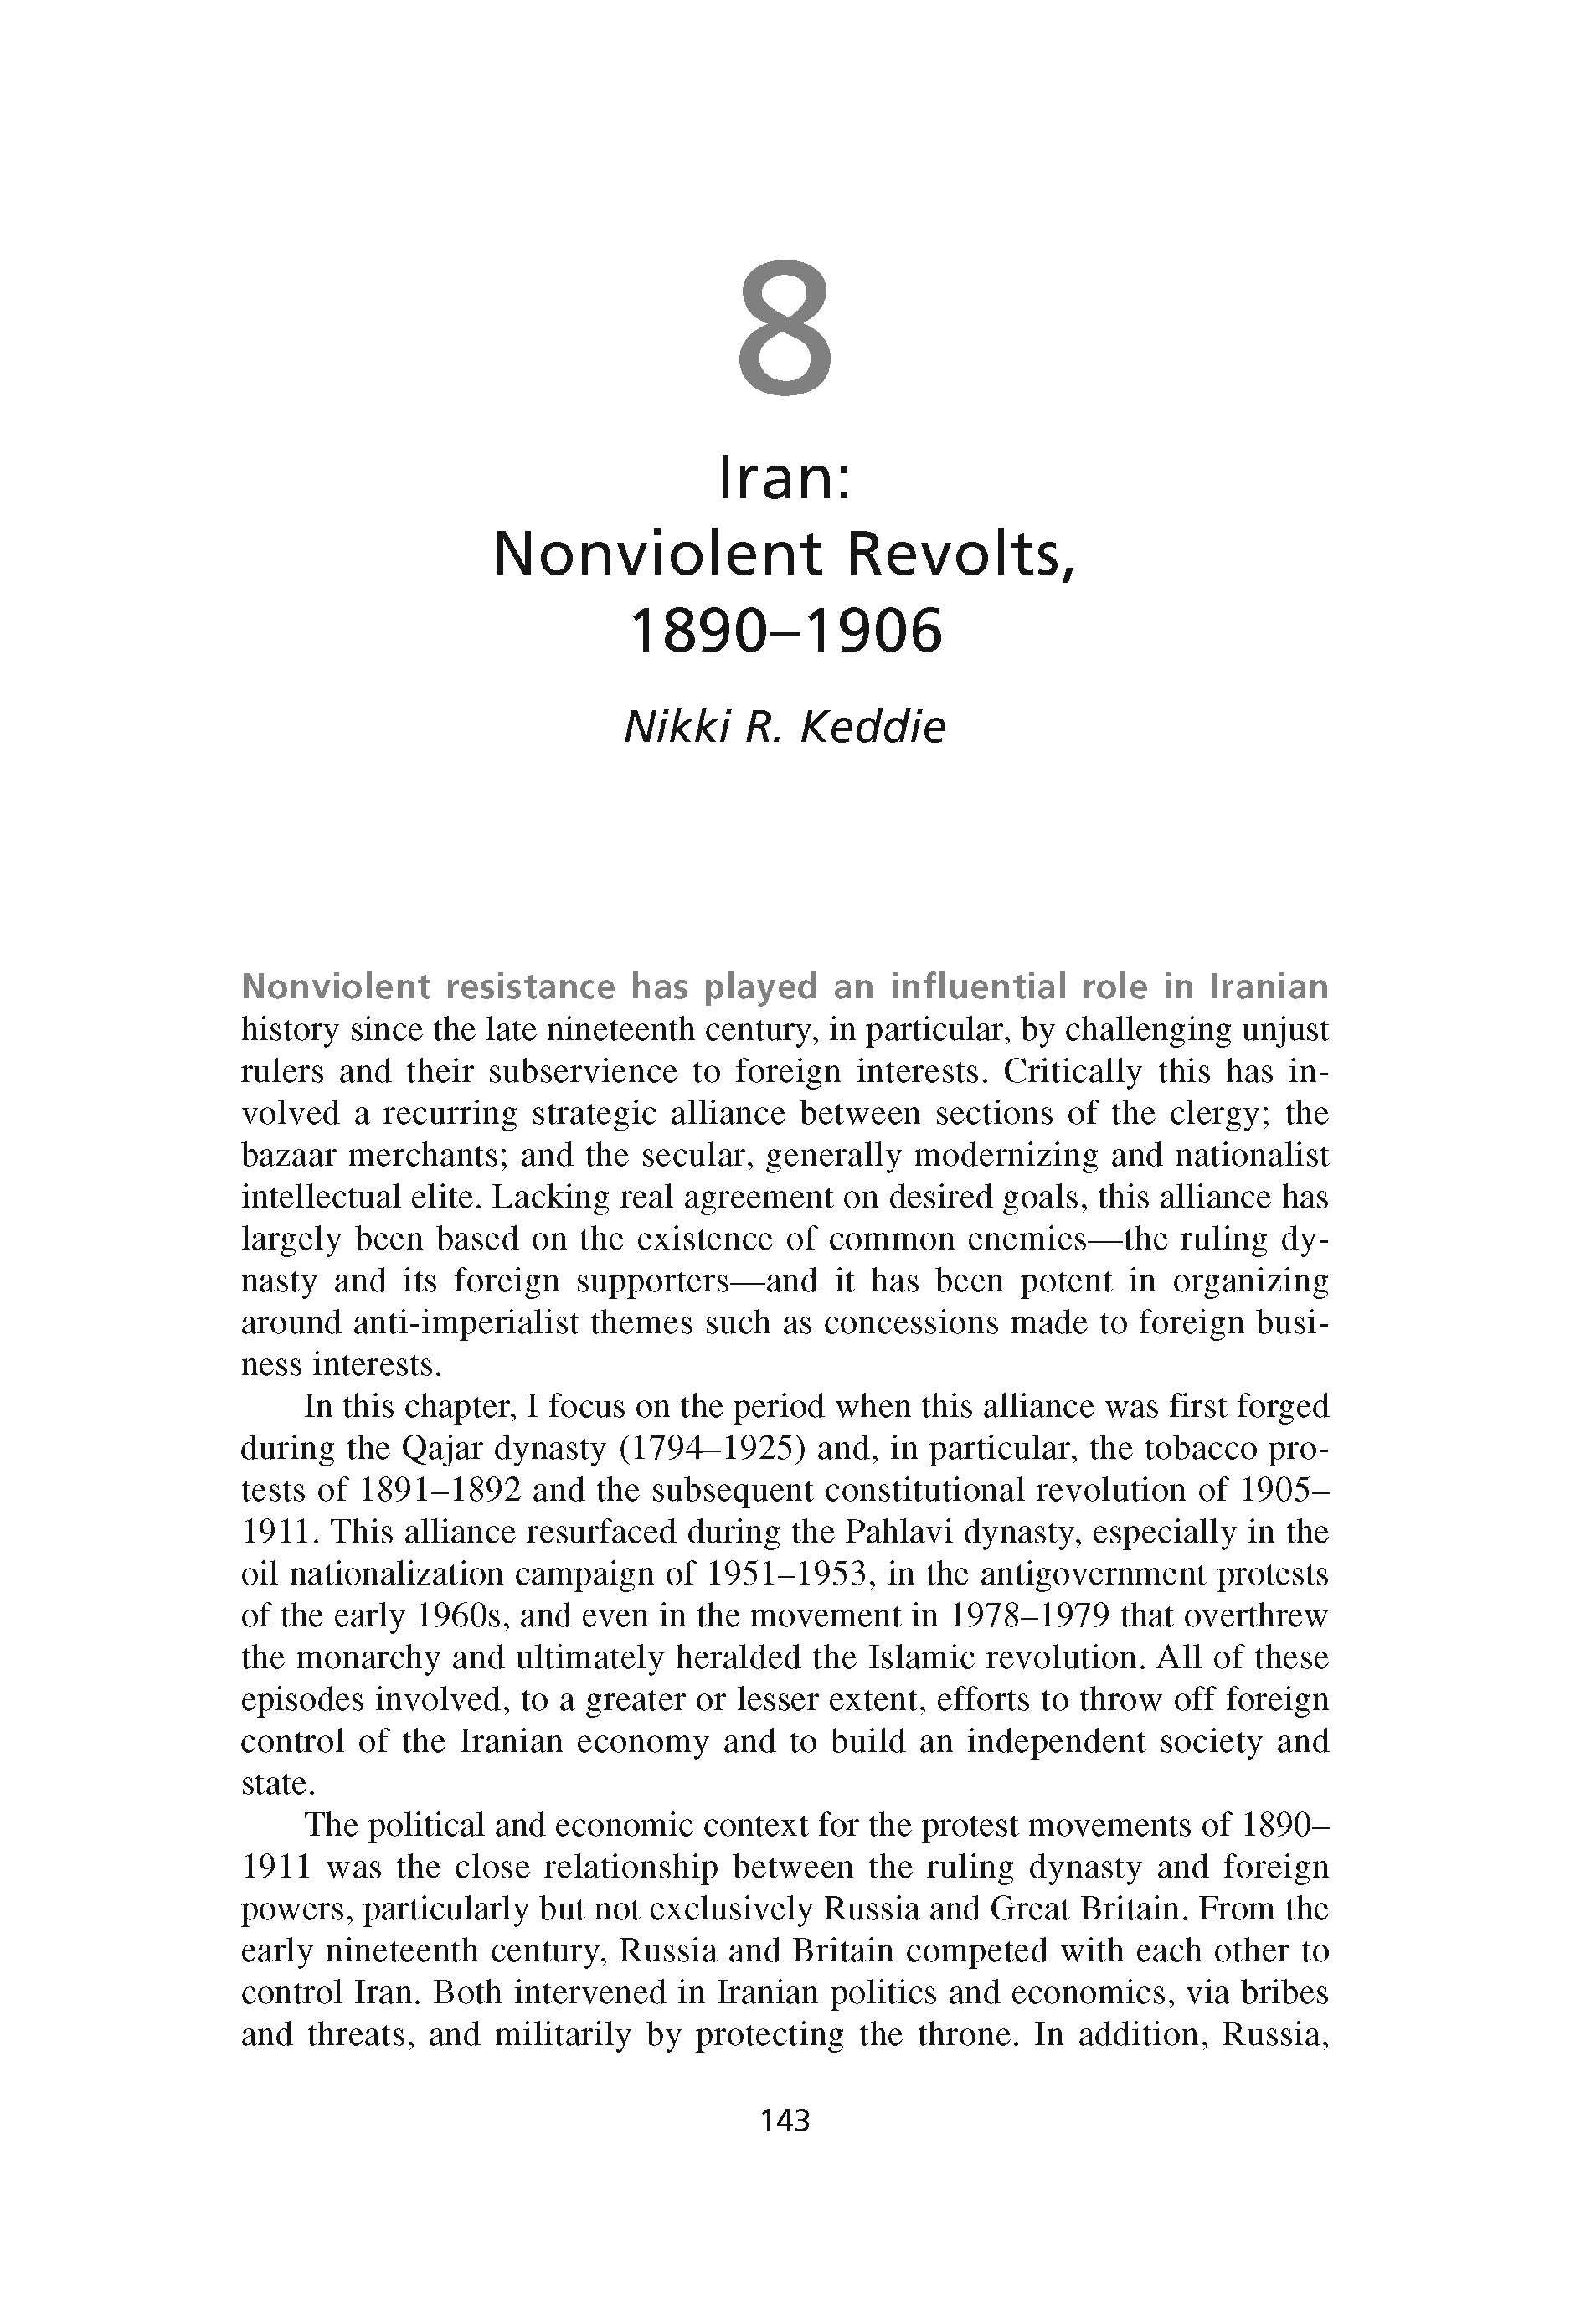 Iran: Nonviolent Revolts, 1890-1906 (Chapter 8 from ‘Recovering Nonviolent History’)